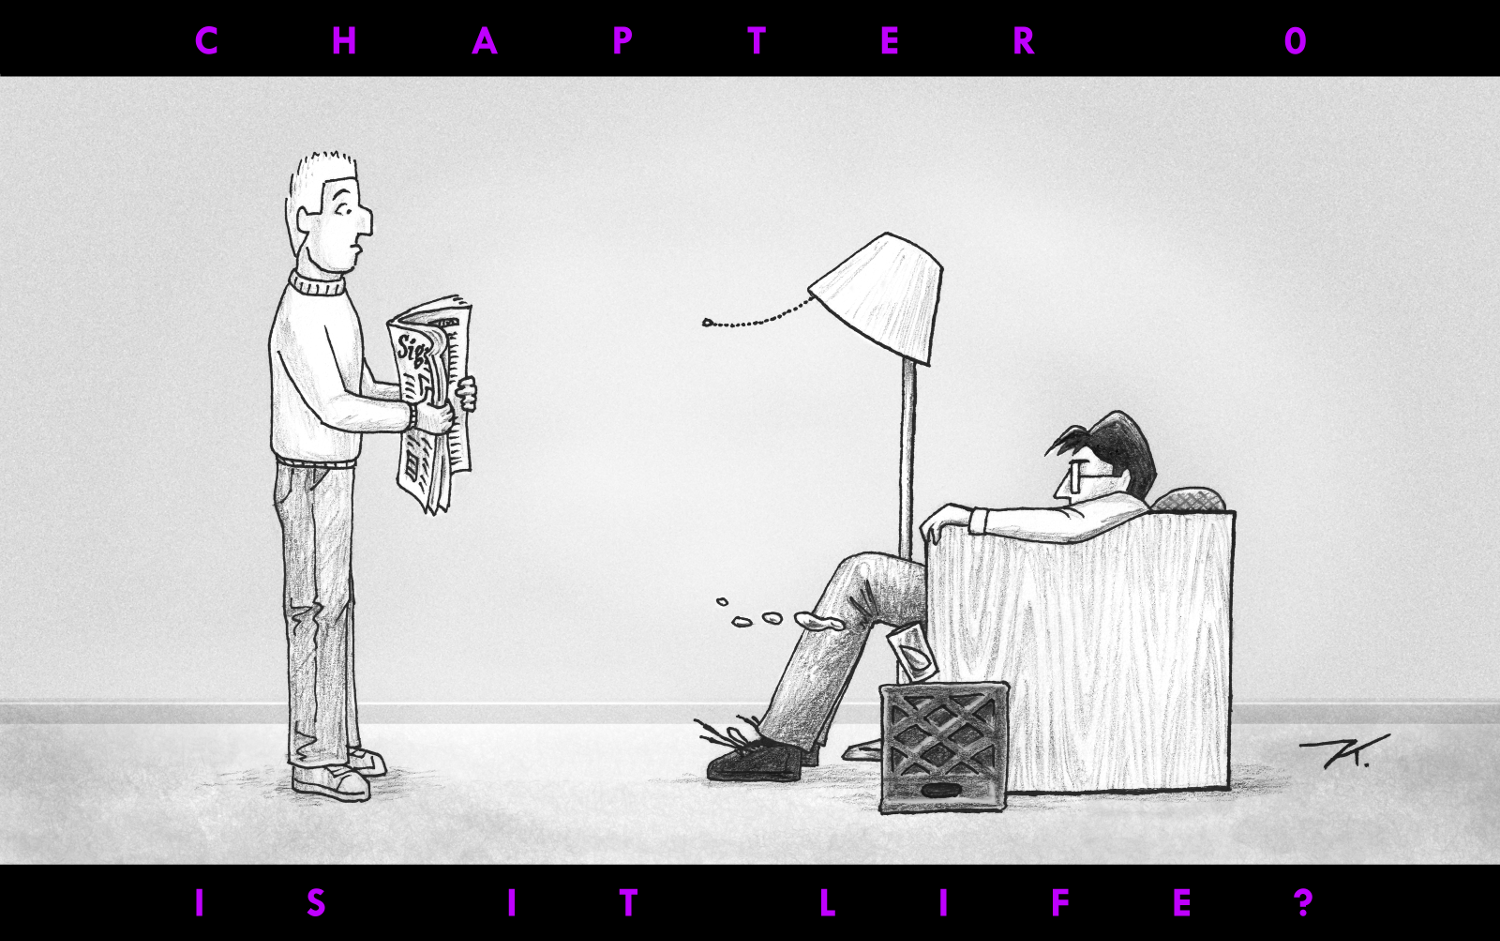 Chapter 0: Is It Life?